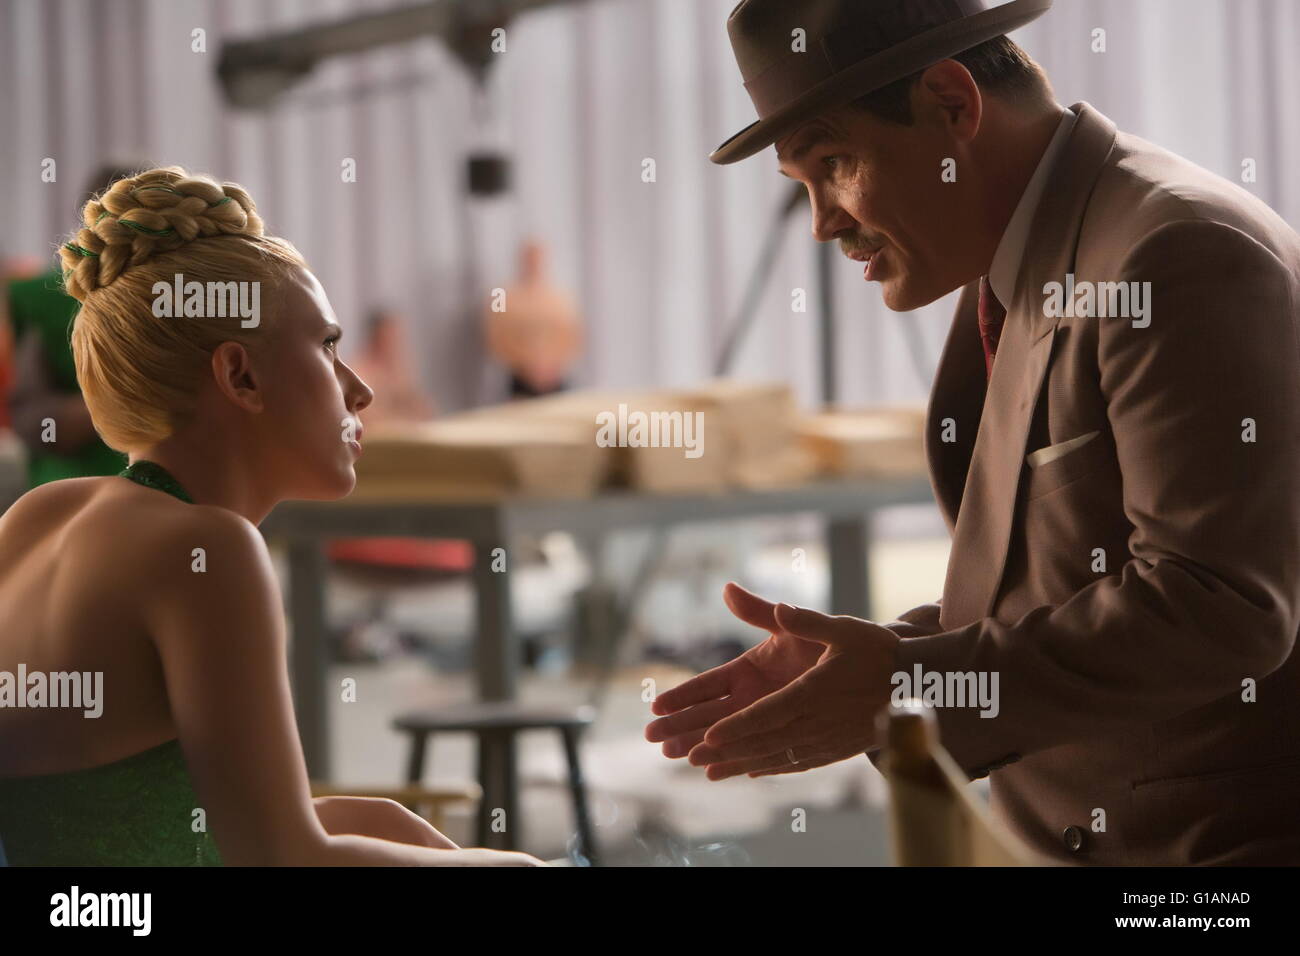 RELEASE DATE: February 5, 2016 TITLE: Hail, Caesar! STUDIO: Universal Pictures DIRECTOR: Ethan Coen, Joel Coen PLOT: A Hollywood fixer in the 1950s works to keep the studio's stars in line PICTURED: Josh Brolin, Scarlett Johansson (Credit: c Universal Pictures/Entertainment Pictures/) Stock Photo